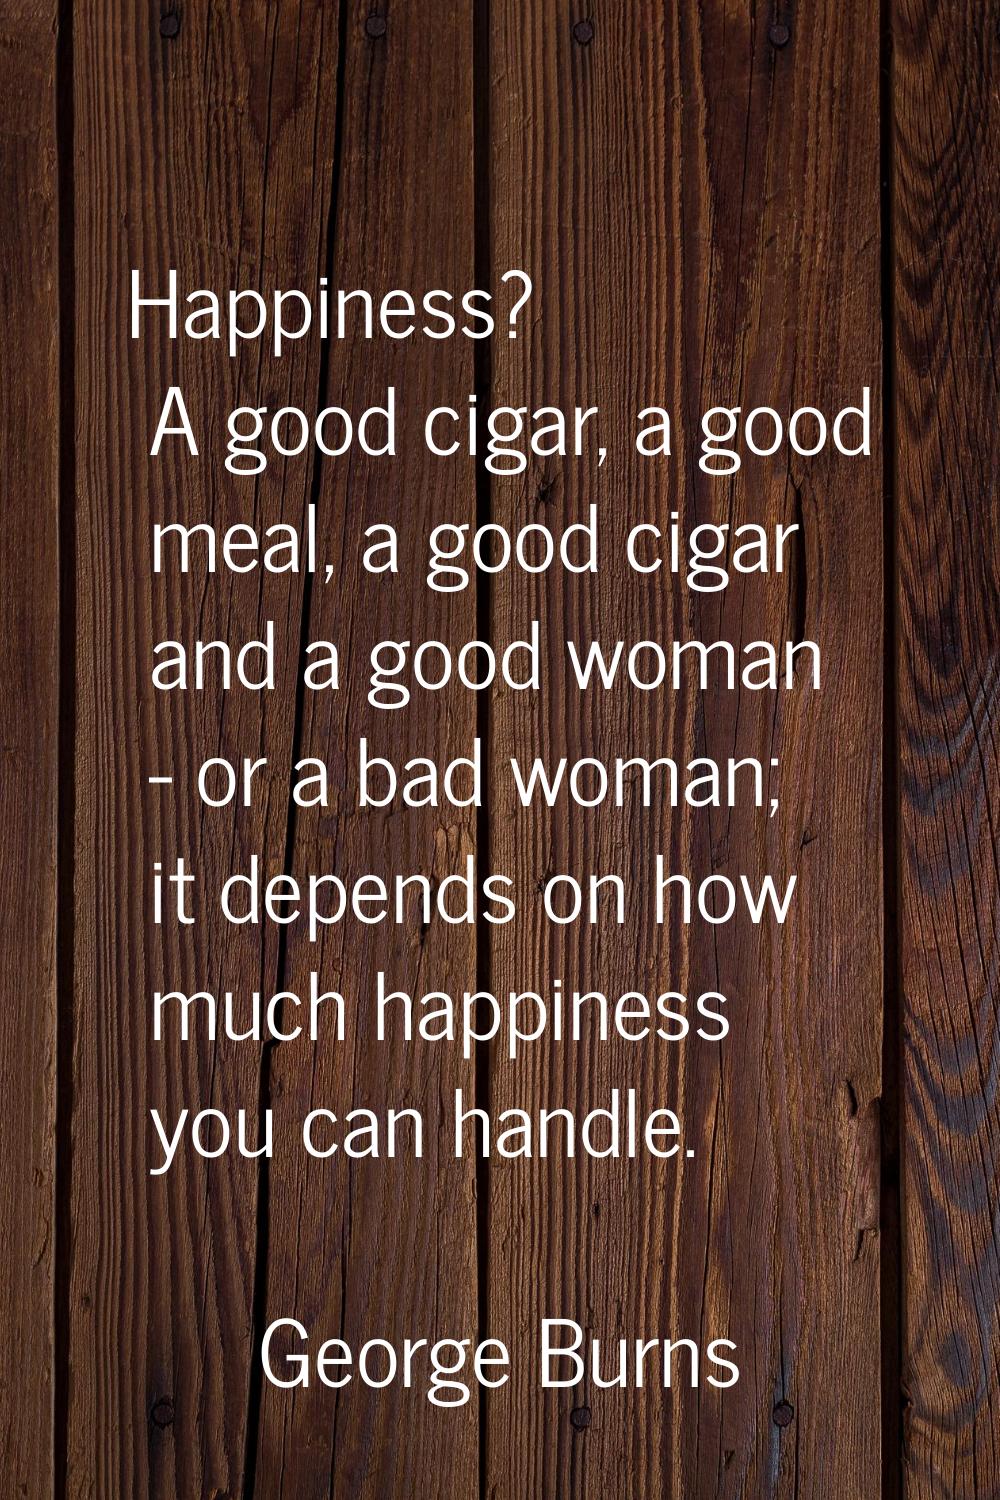 Happiness? A good cigar, a good meal, a good cigar and a good woman - or a bad woman; it depends on